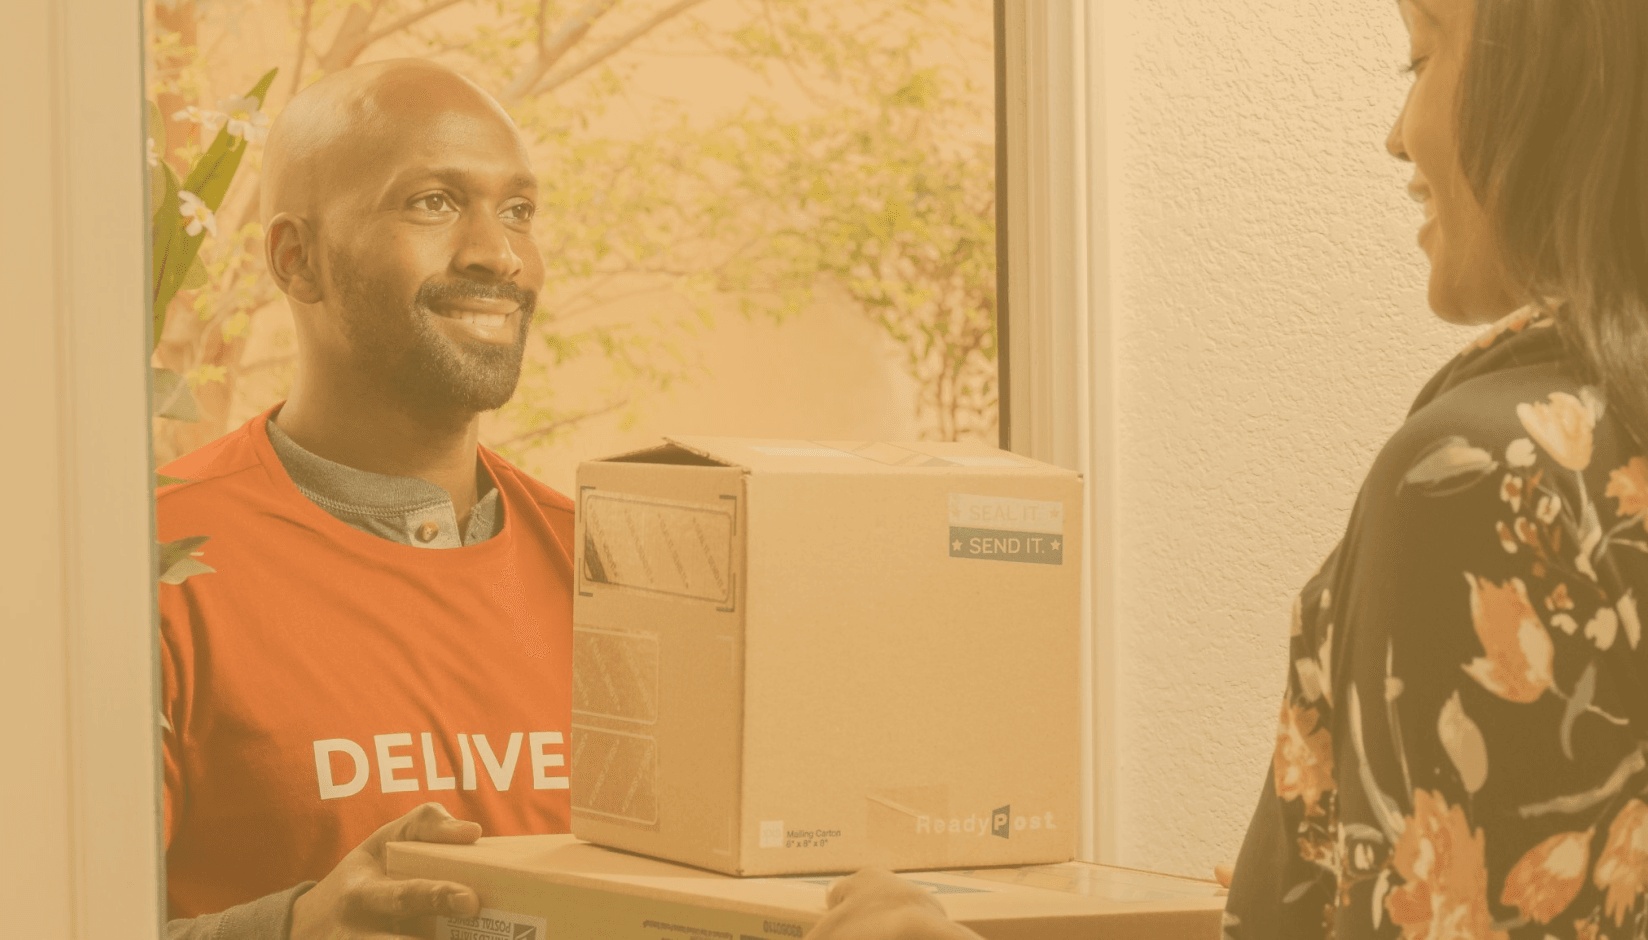 Deliveries management at a coworking space